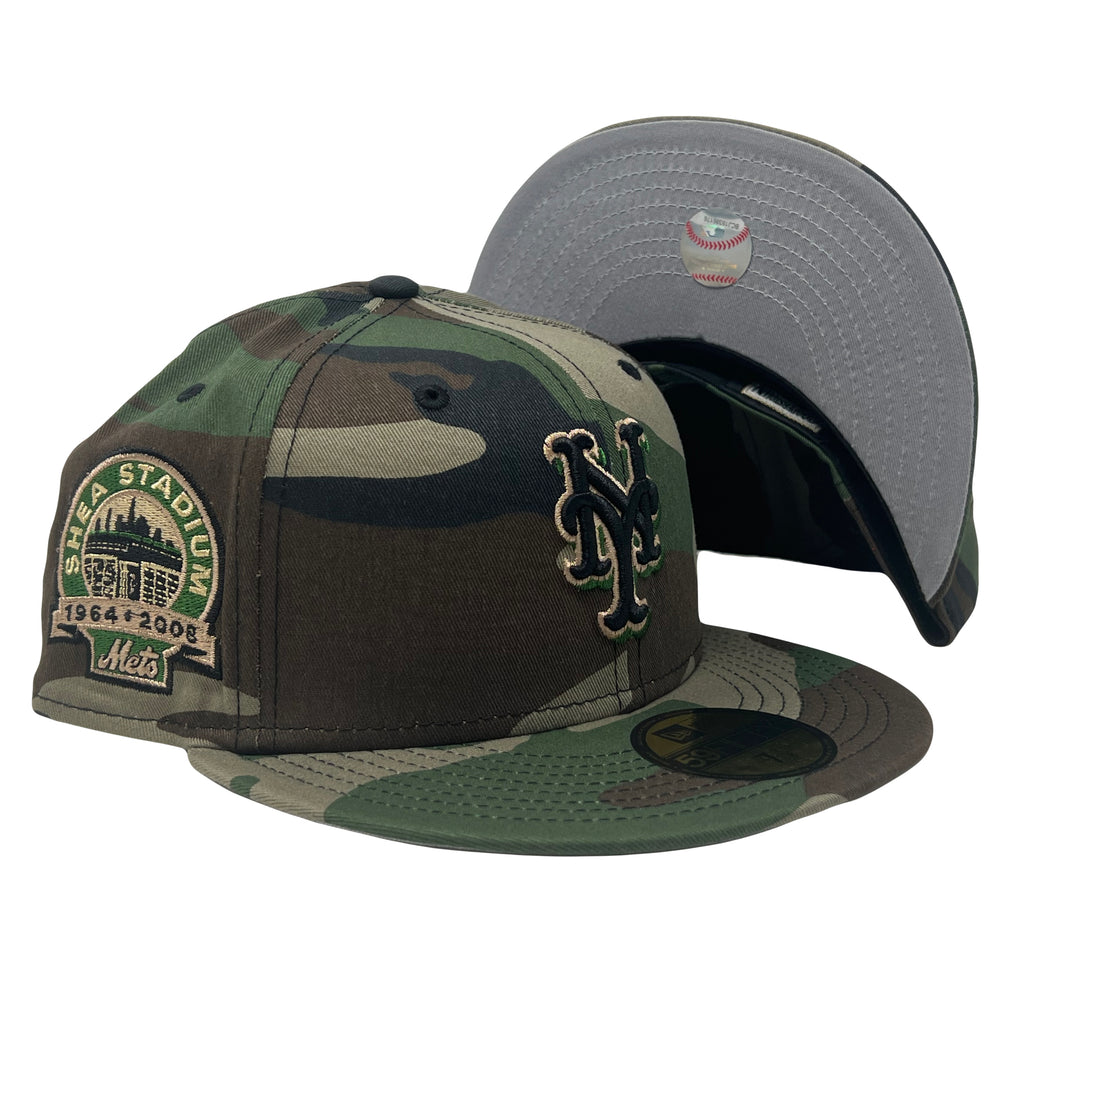 New York Mets Shea Stadium Woodland Camouflage 5950 New Era Fitted Hat